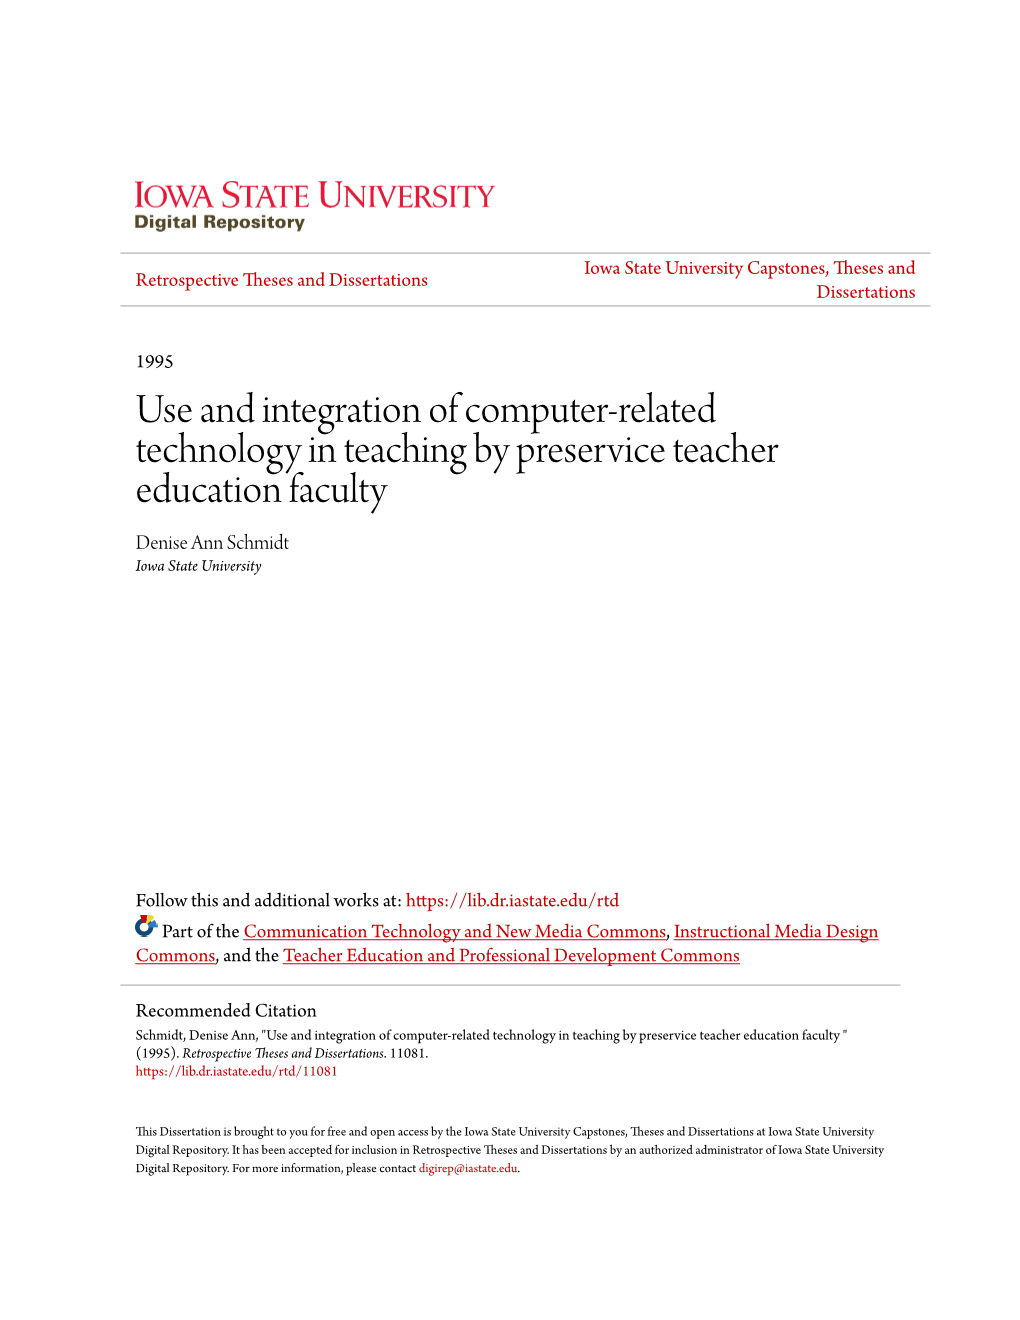 Use and Integration of Computer-Related Technology in Teaching by Preservice Teacher Education Faculty Denise Ann Schmidt Iowa State University